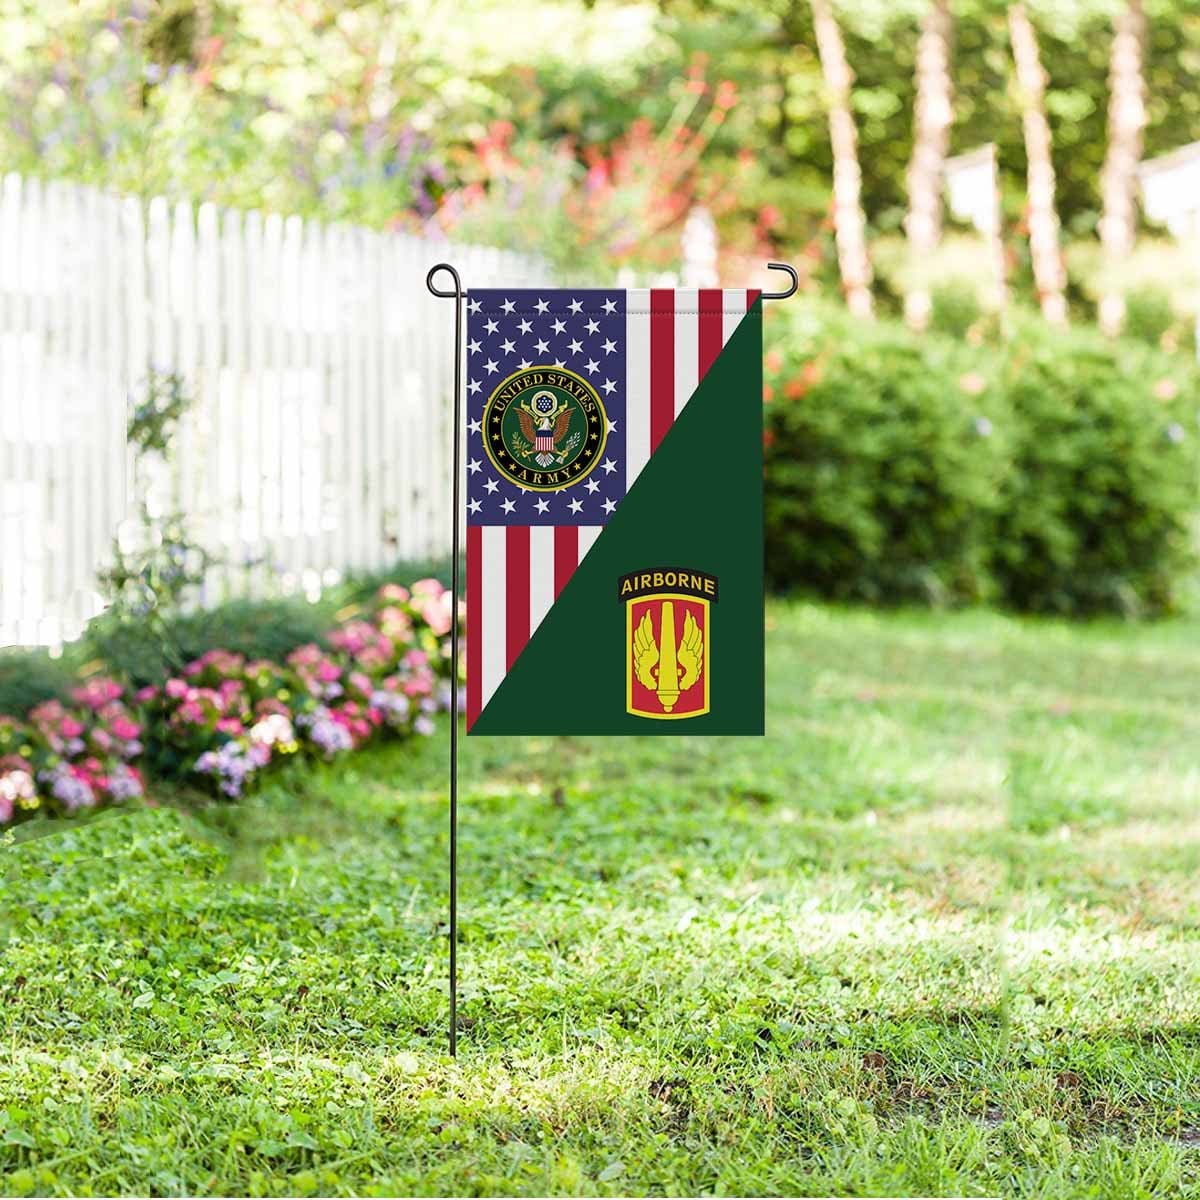 US ARMY 18TH FIELD ARTILLERY WITH AIRBORNE TAB Garden Flag/Yard Flag 12 inches x 18 inches Twin-Side Printing-GDFlag-Army-CSIB-Veterans Nation